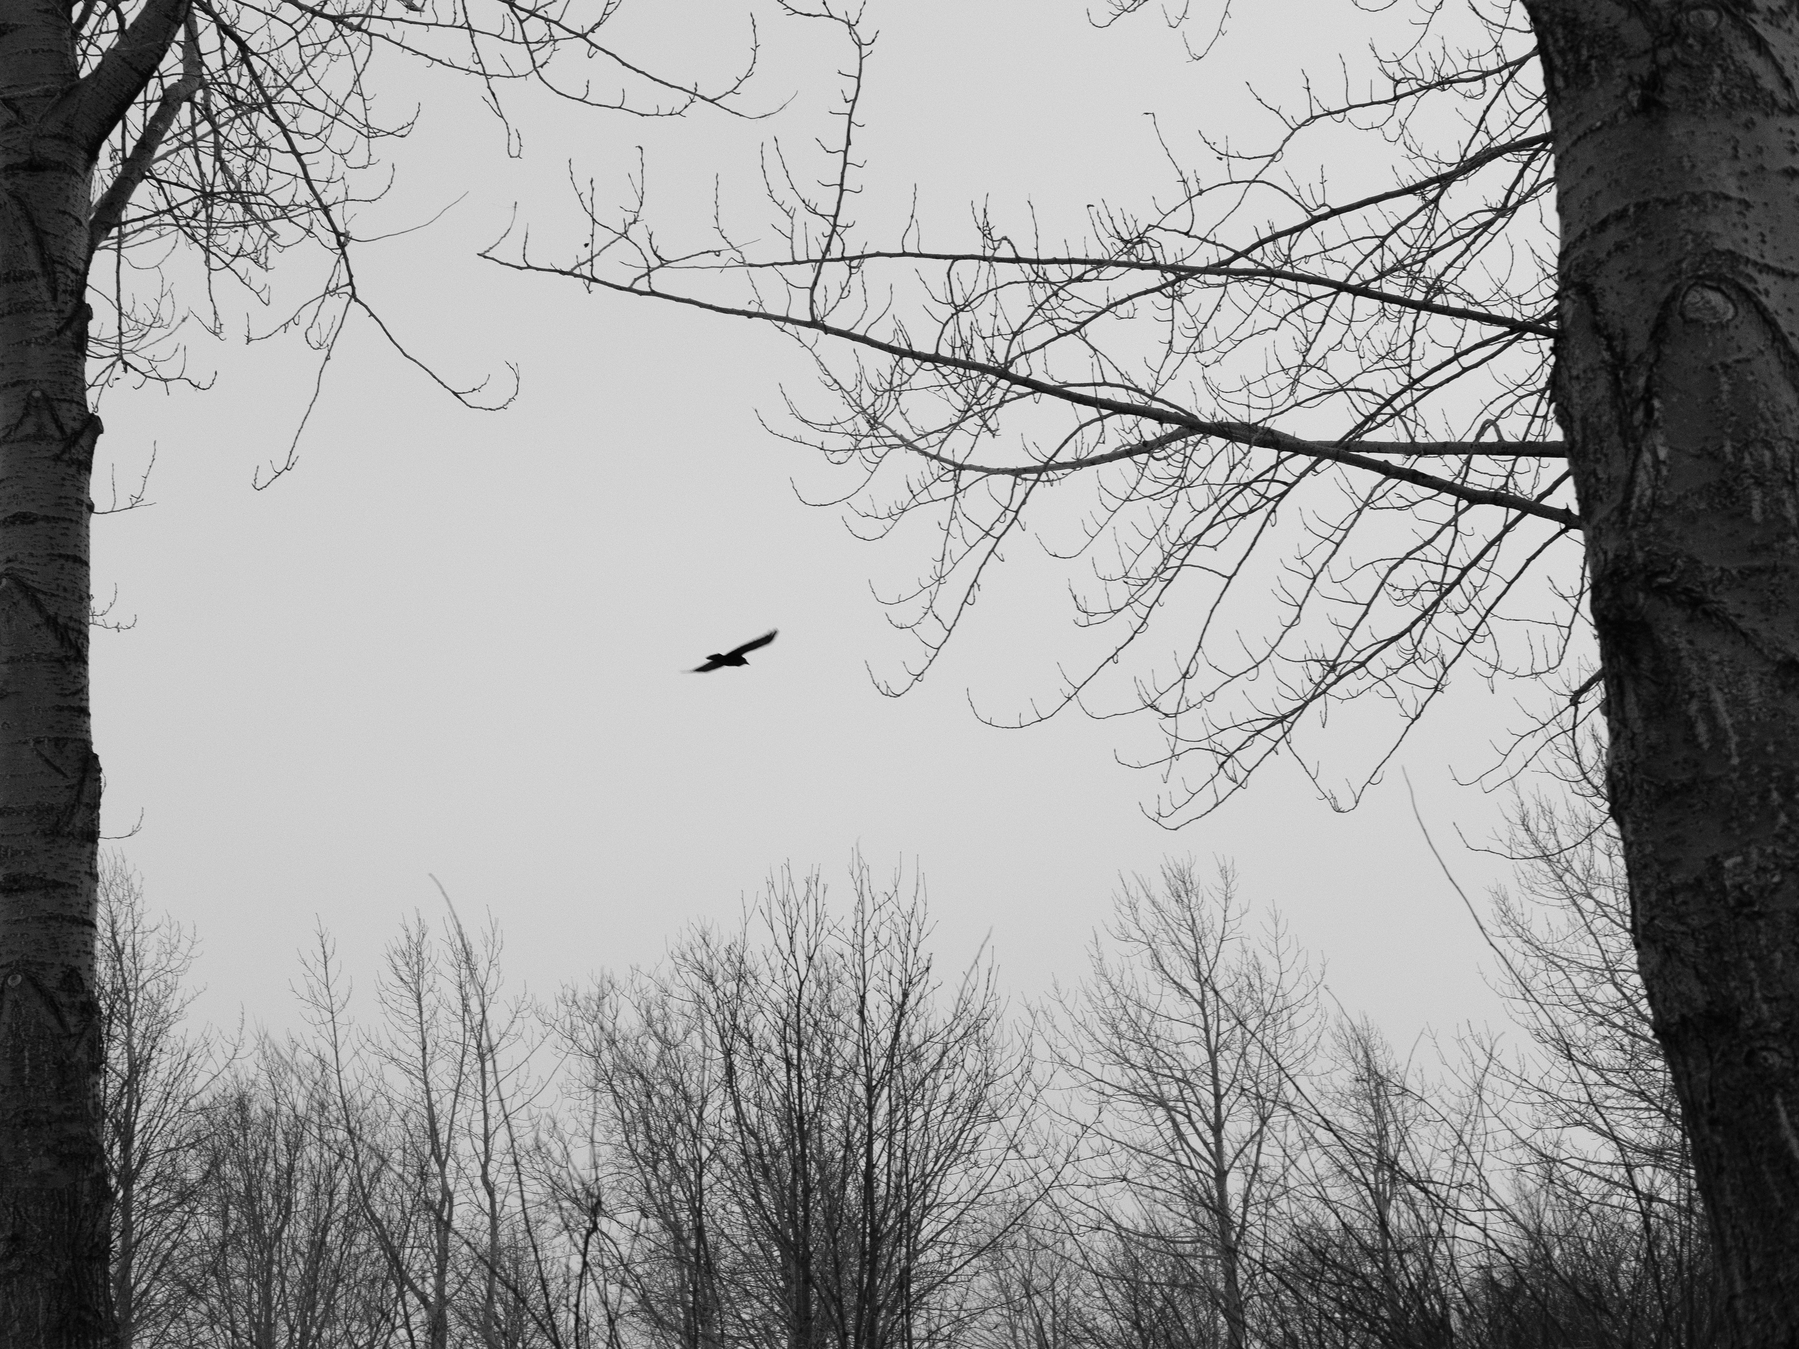 A raven is seen though a pair of trees flying